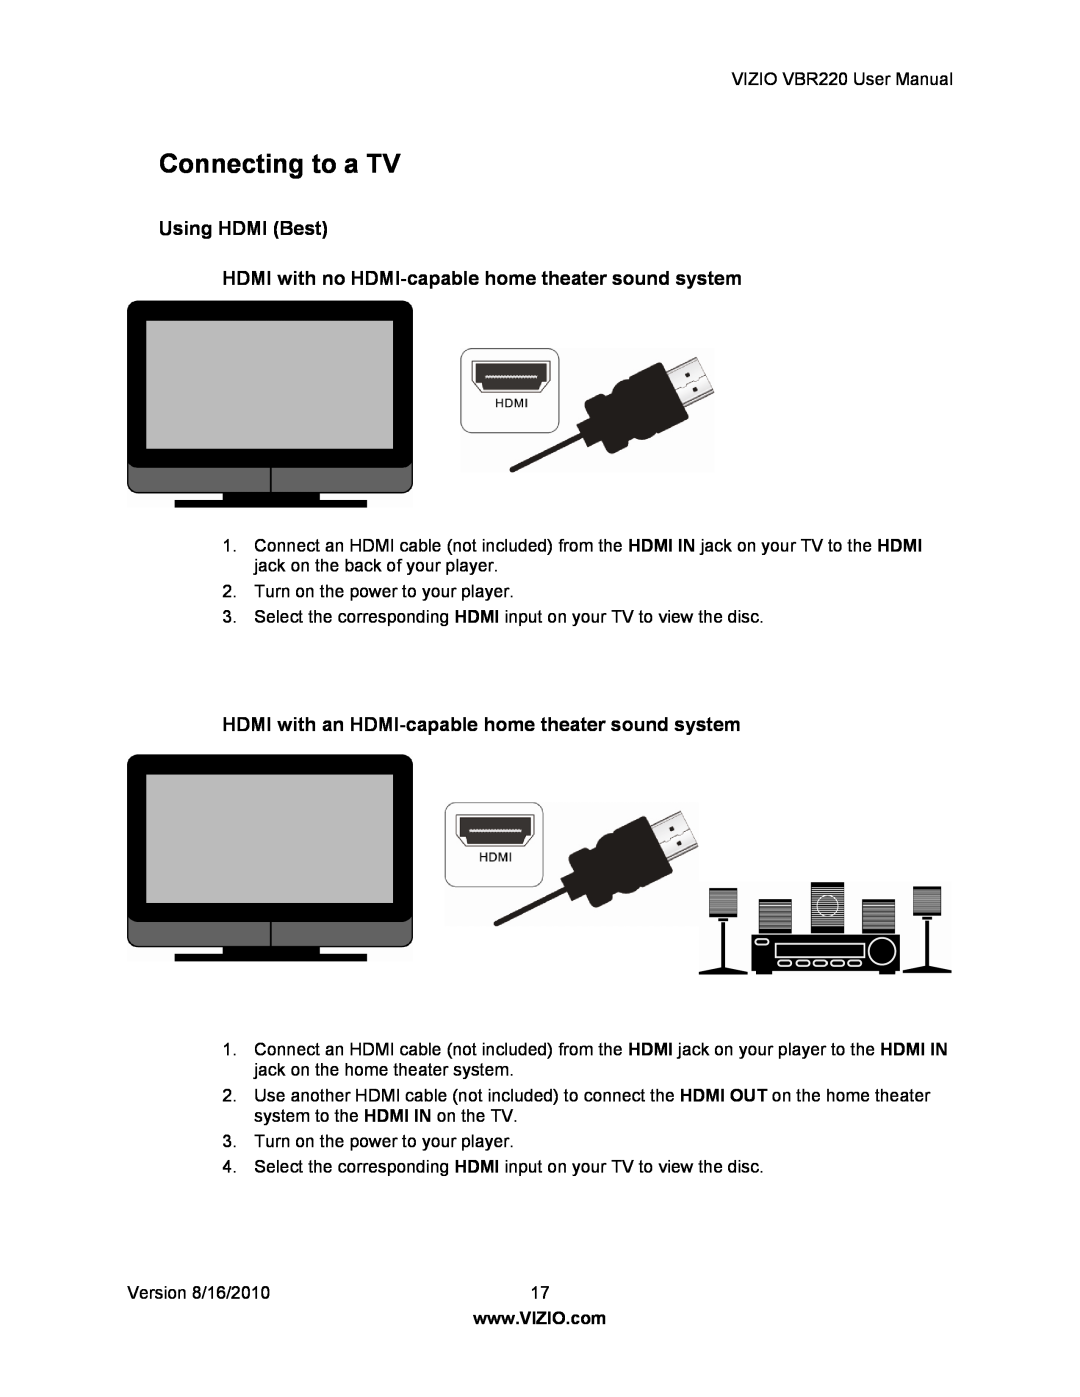 Panasonic VBR220 user manual Connecting to a TV, Using HDMI Best HDMI with no HDMI-capable home theater sound system 